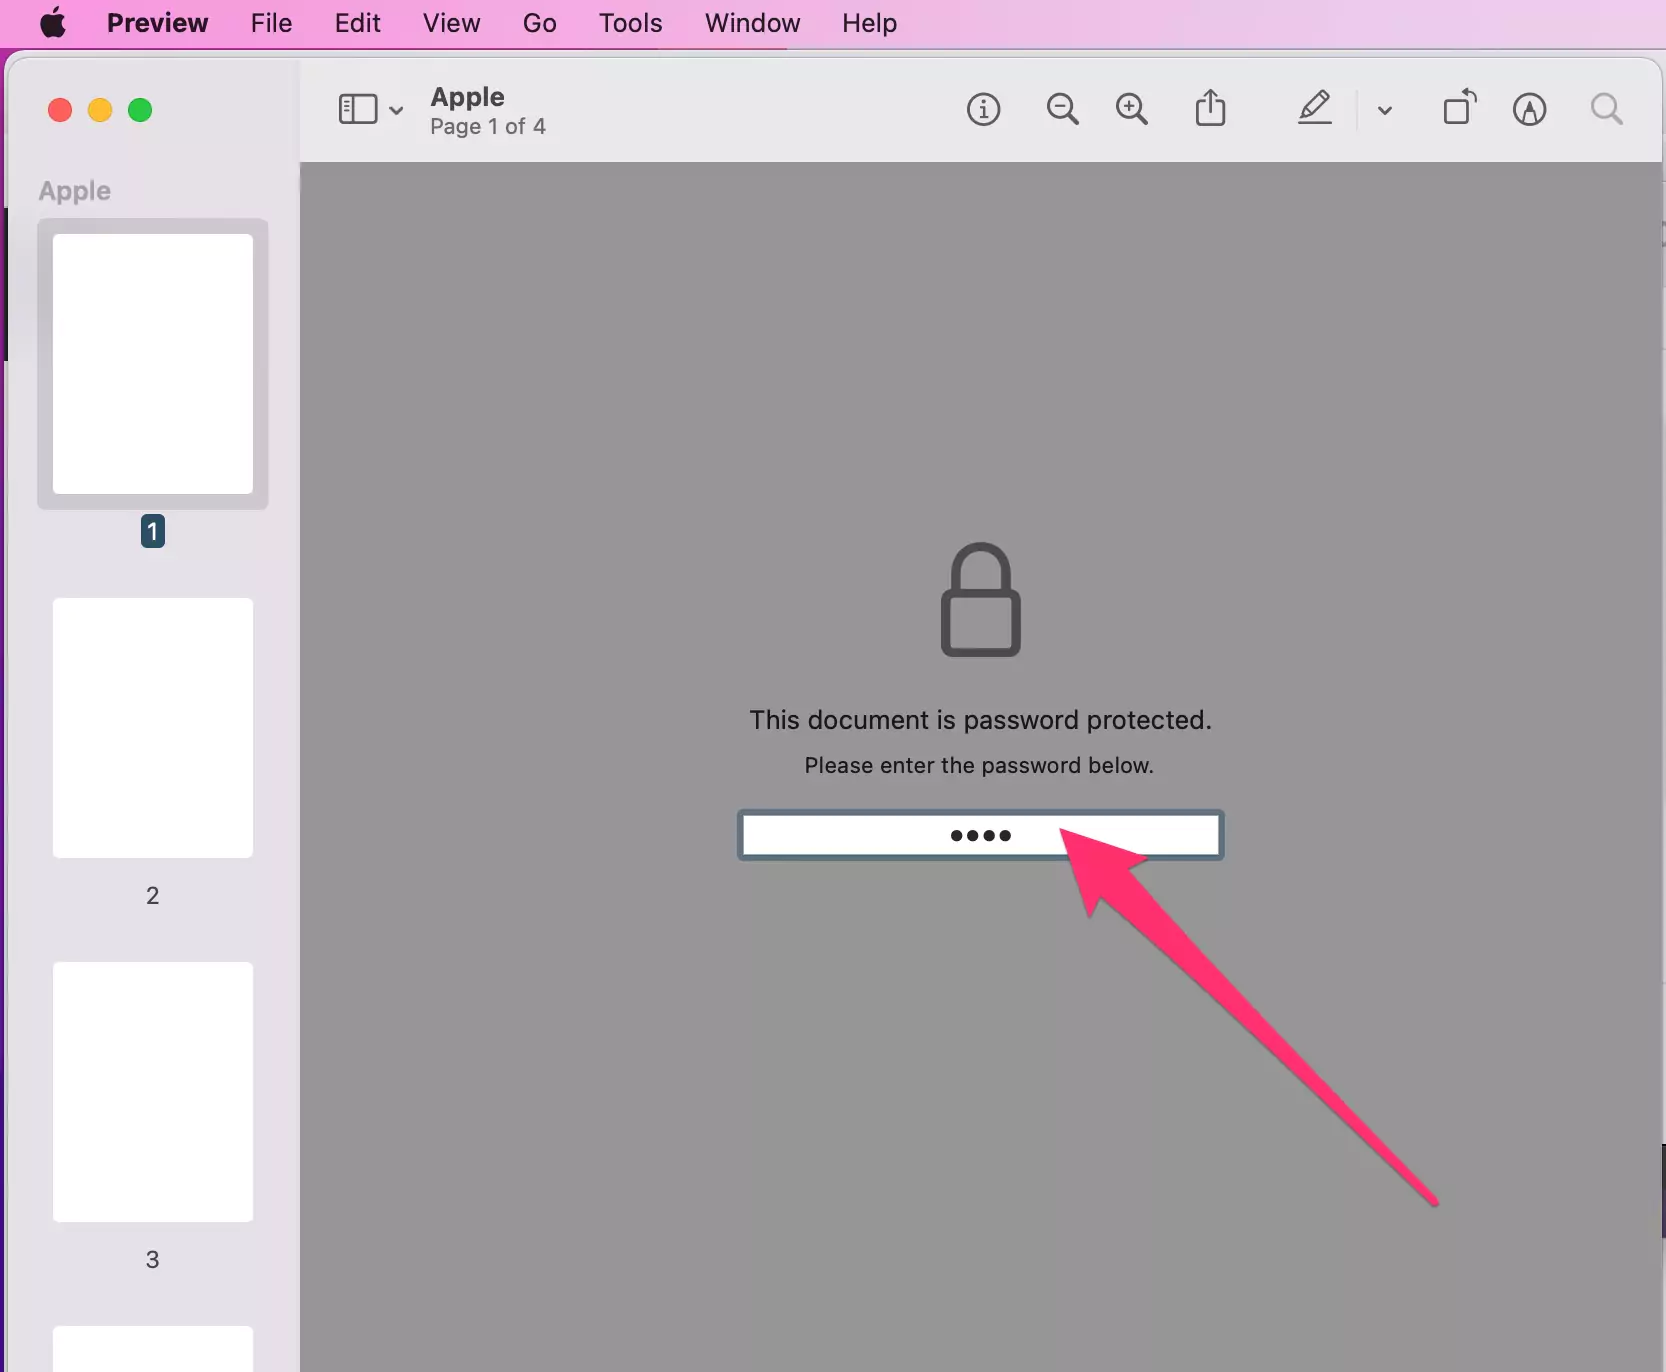 enter-password-and-hit-return-to-open-on-mac-preview-app